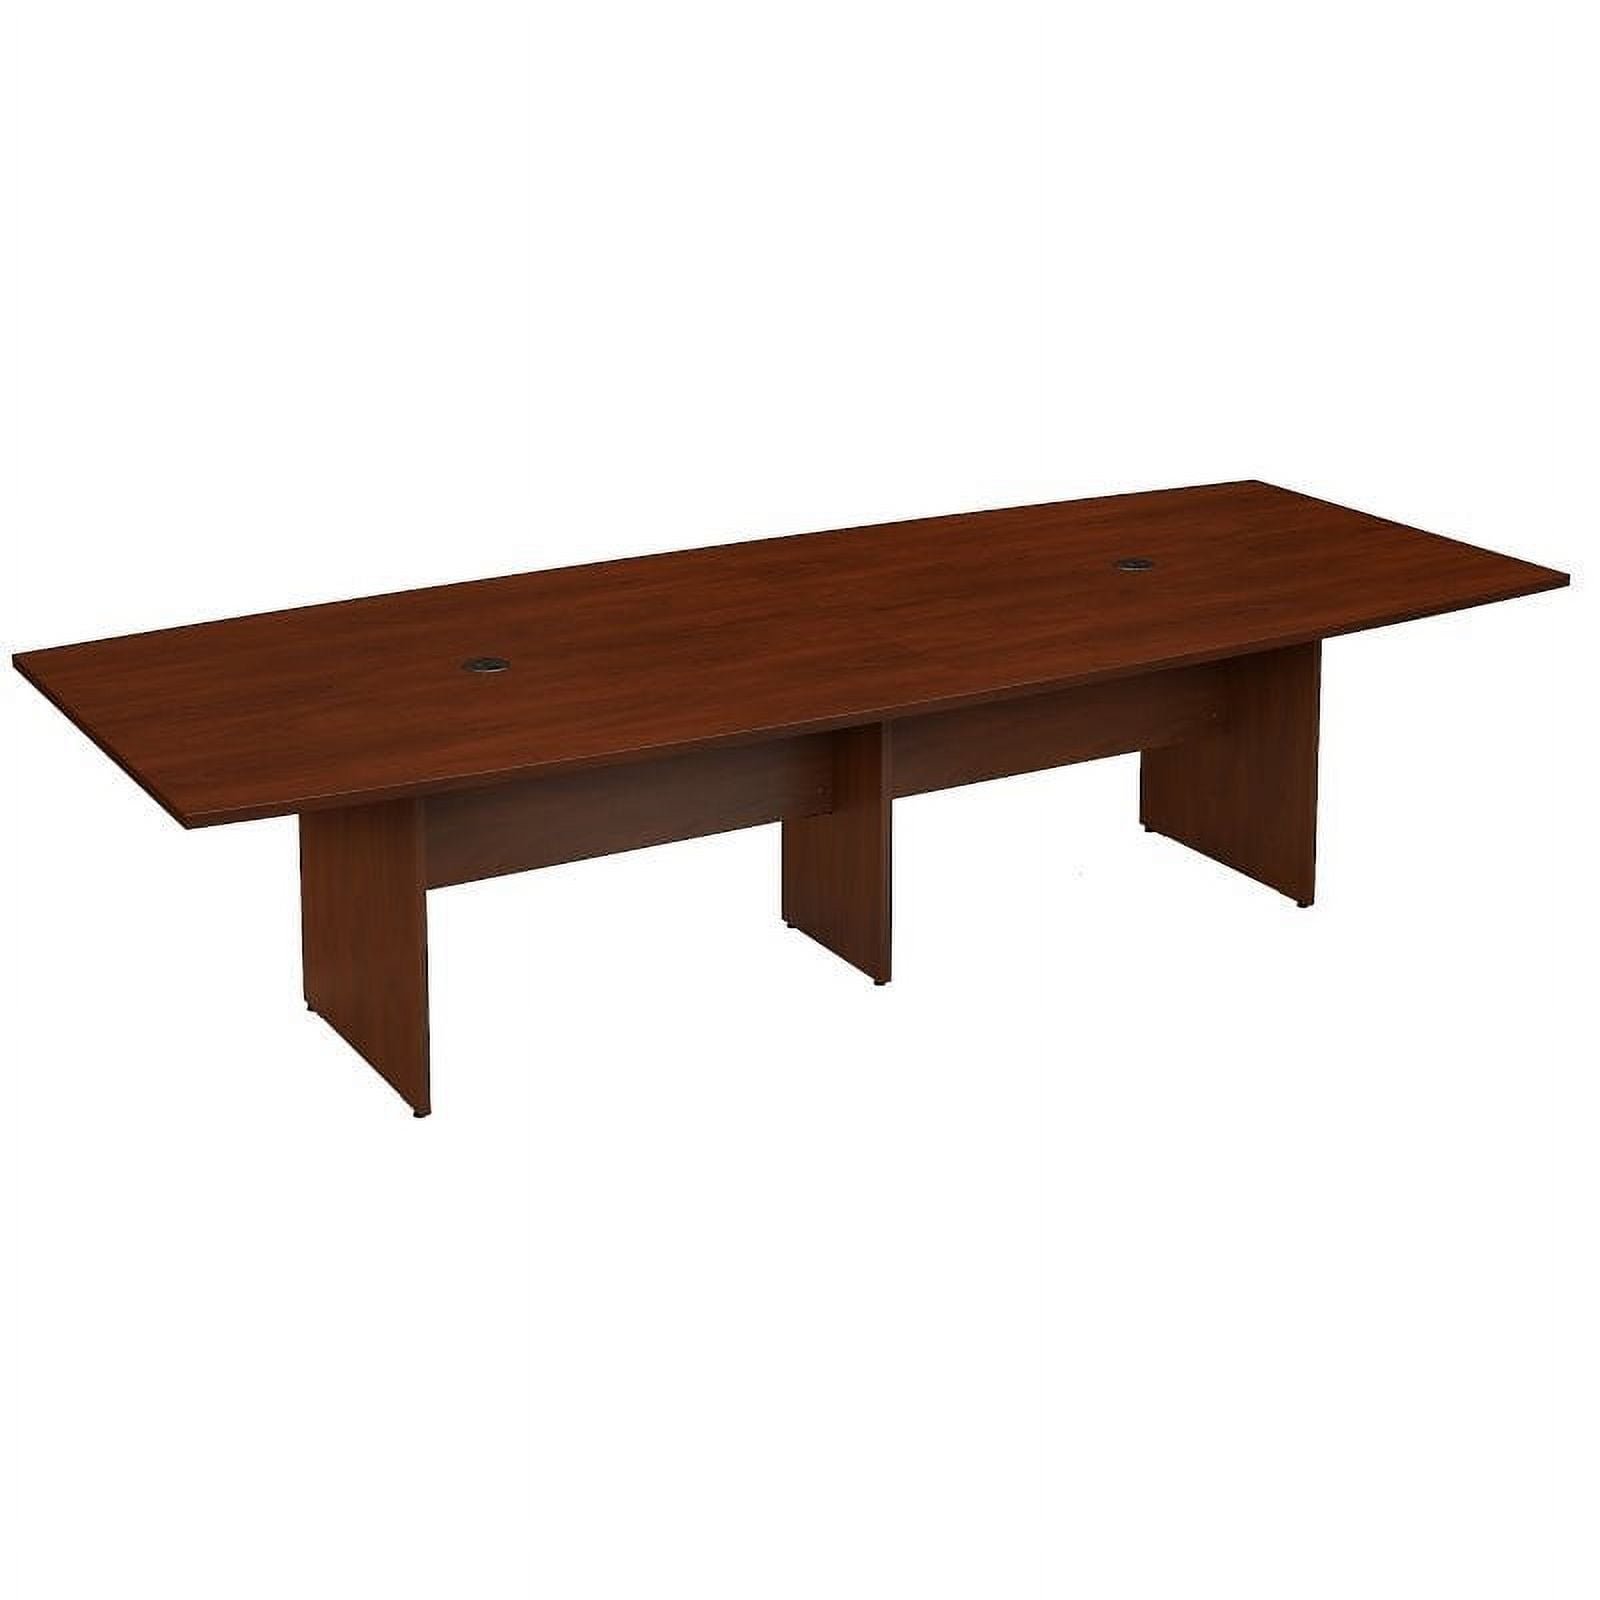 Picture of Bush Business Furniture 99TB12048HCK 120 x 48 in. Boat Shaped Conference Table with Wood Base - Hansen Cherry